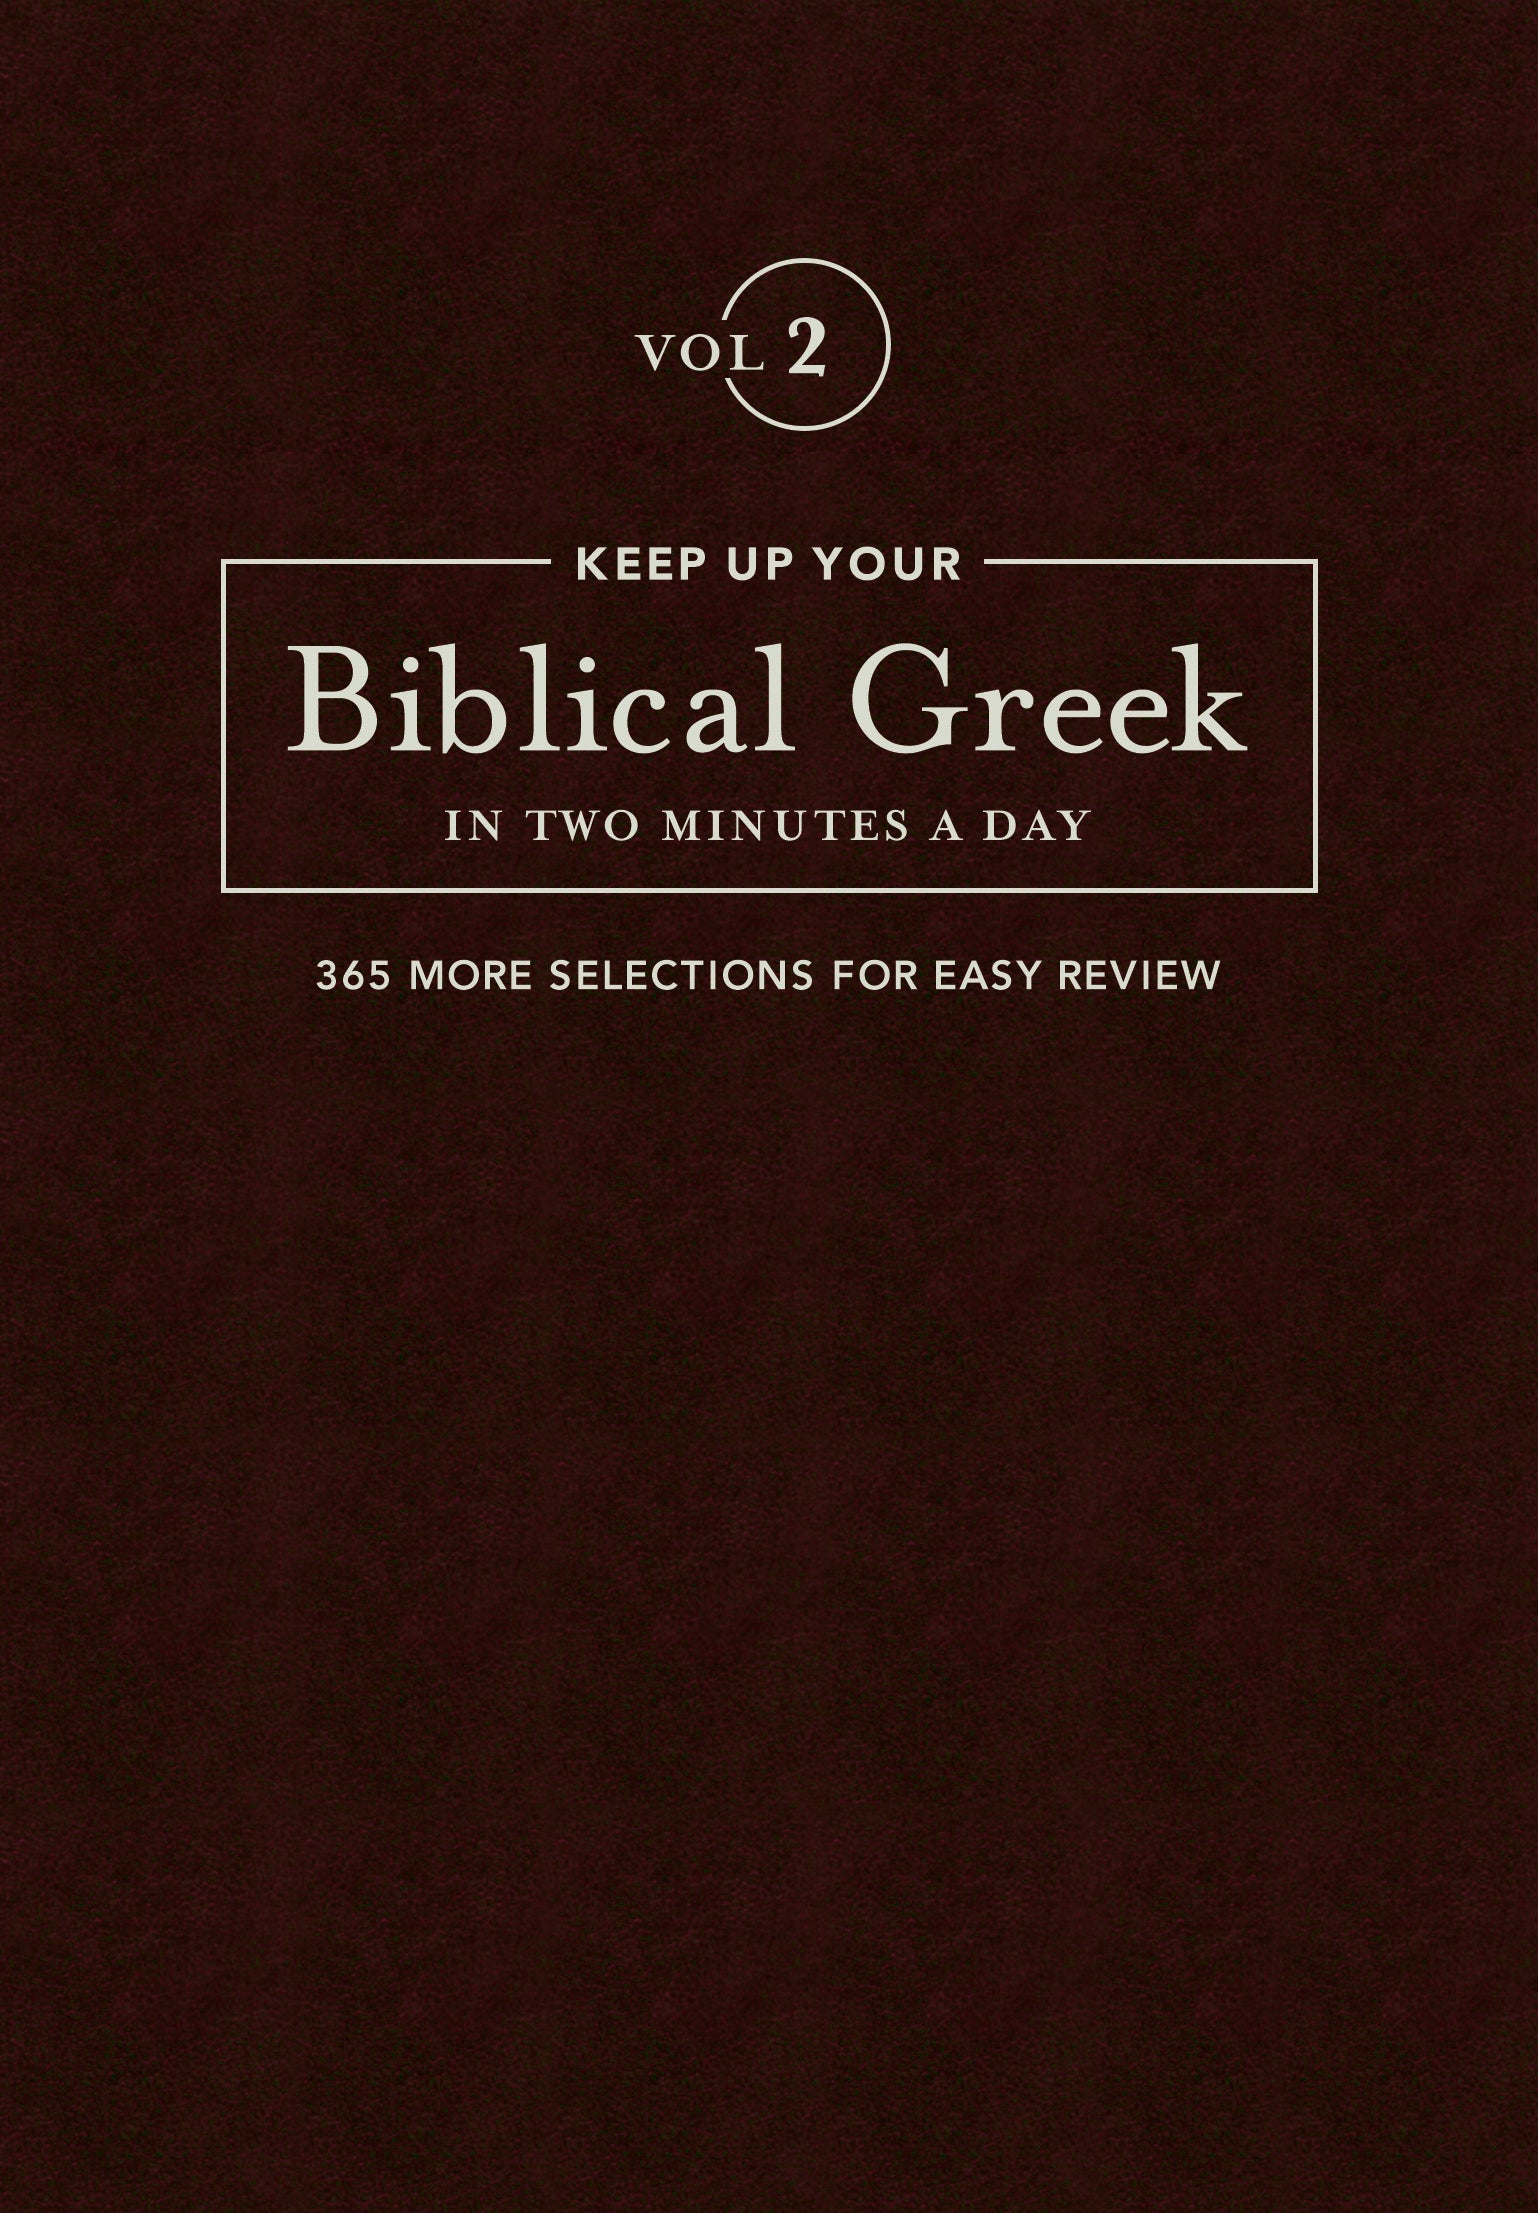 Image of Keep Up Your Biblical Greek In Two Minutes A Day Vol. 2 other